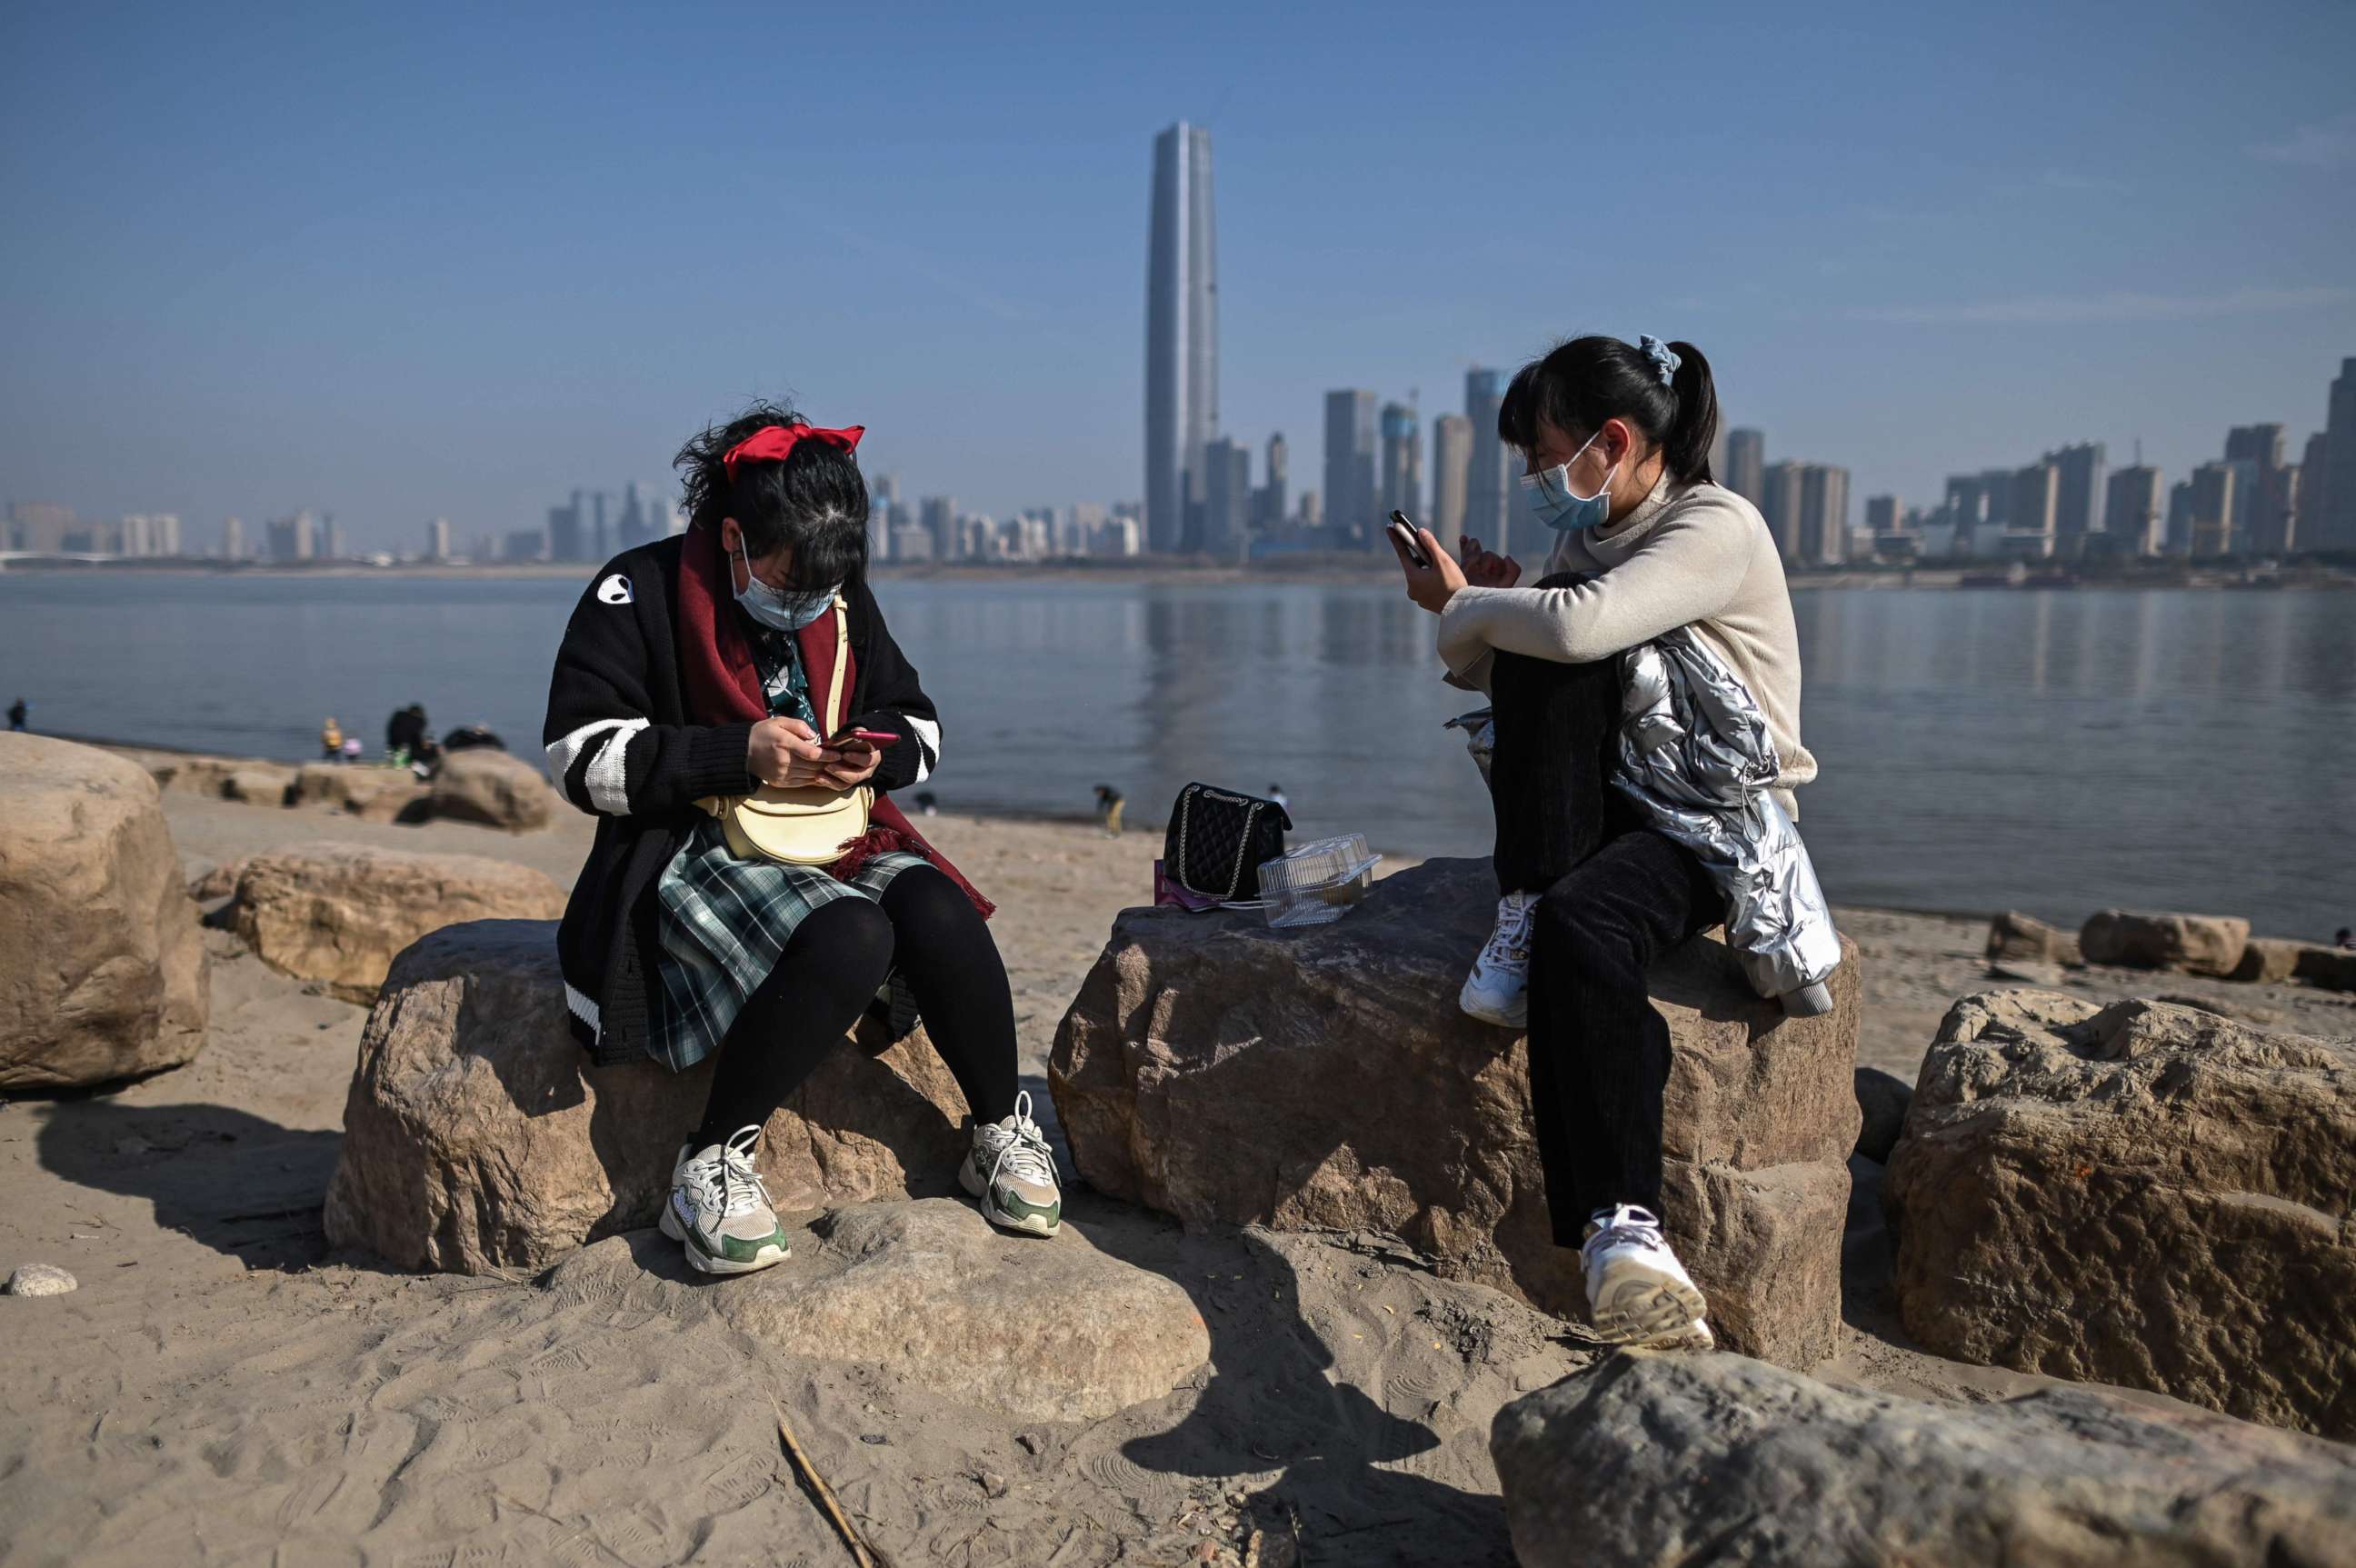 PHOTO: Women wearing face masks look at their mobile phones on the banks of the Yangtze River in Wuhan, China's central Hubei province on January 19, 2021. 